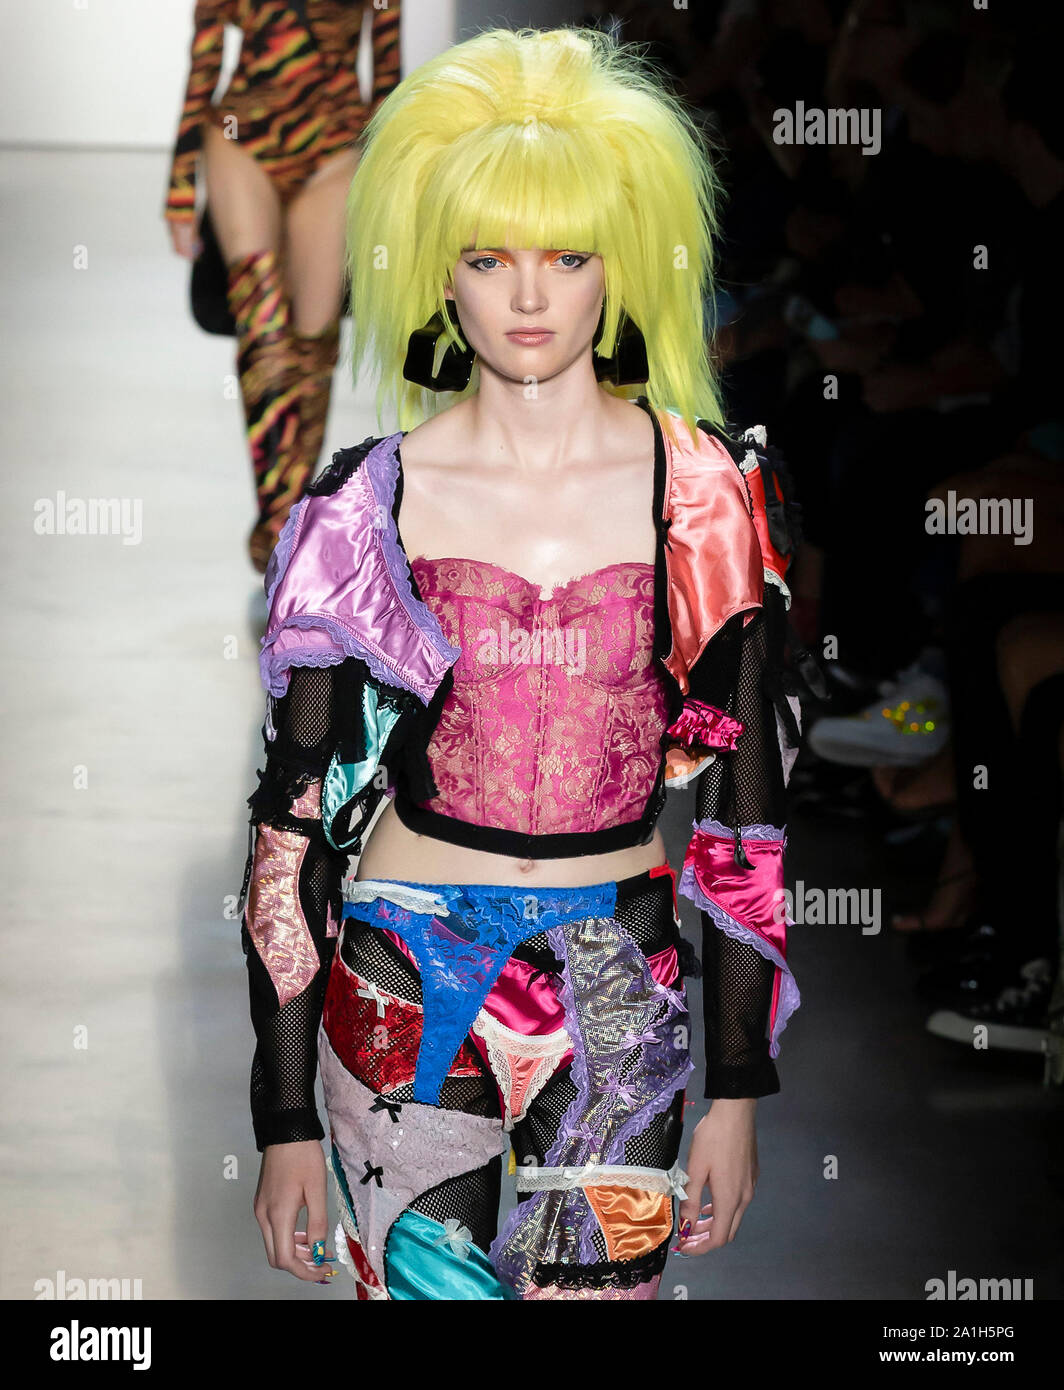 New York, NY - Sept 09, 2019: Ruth Bell walks the runway at the Jeremy Scott Spring Summer 2020 Fashion Show Stock Photo